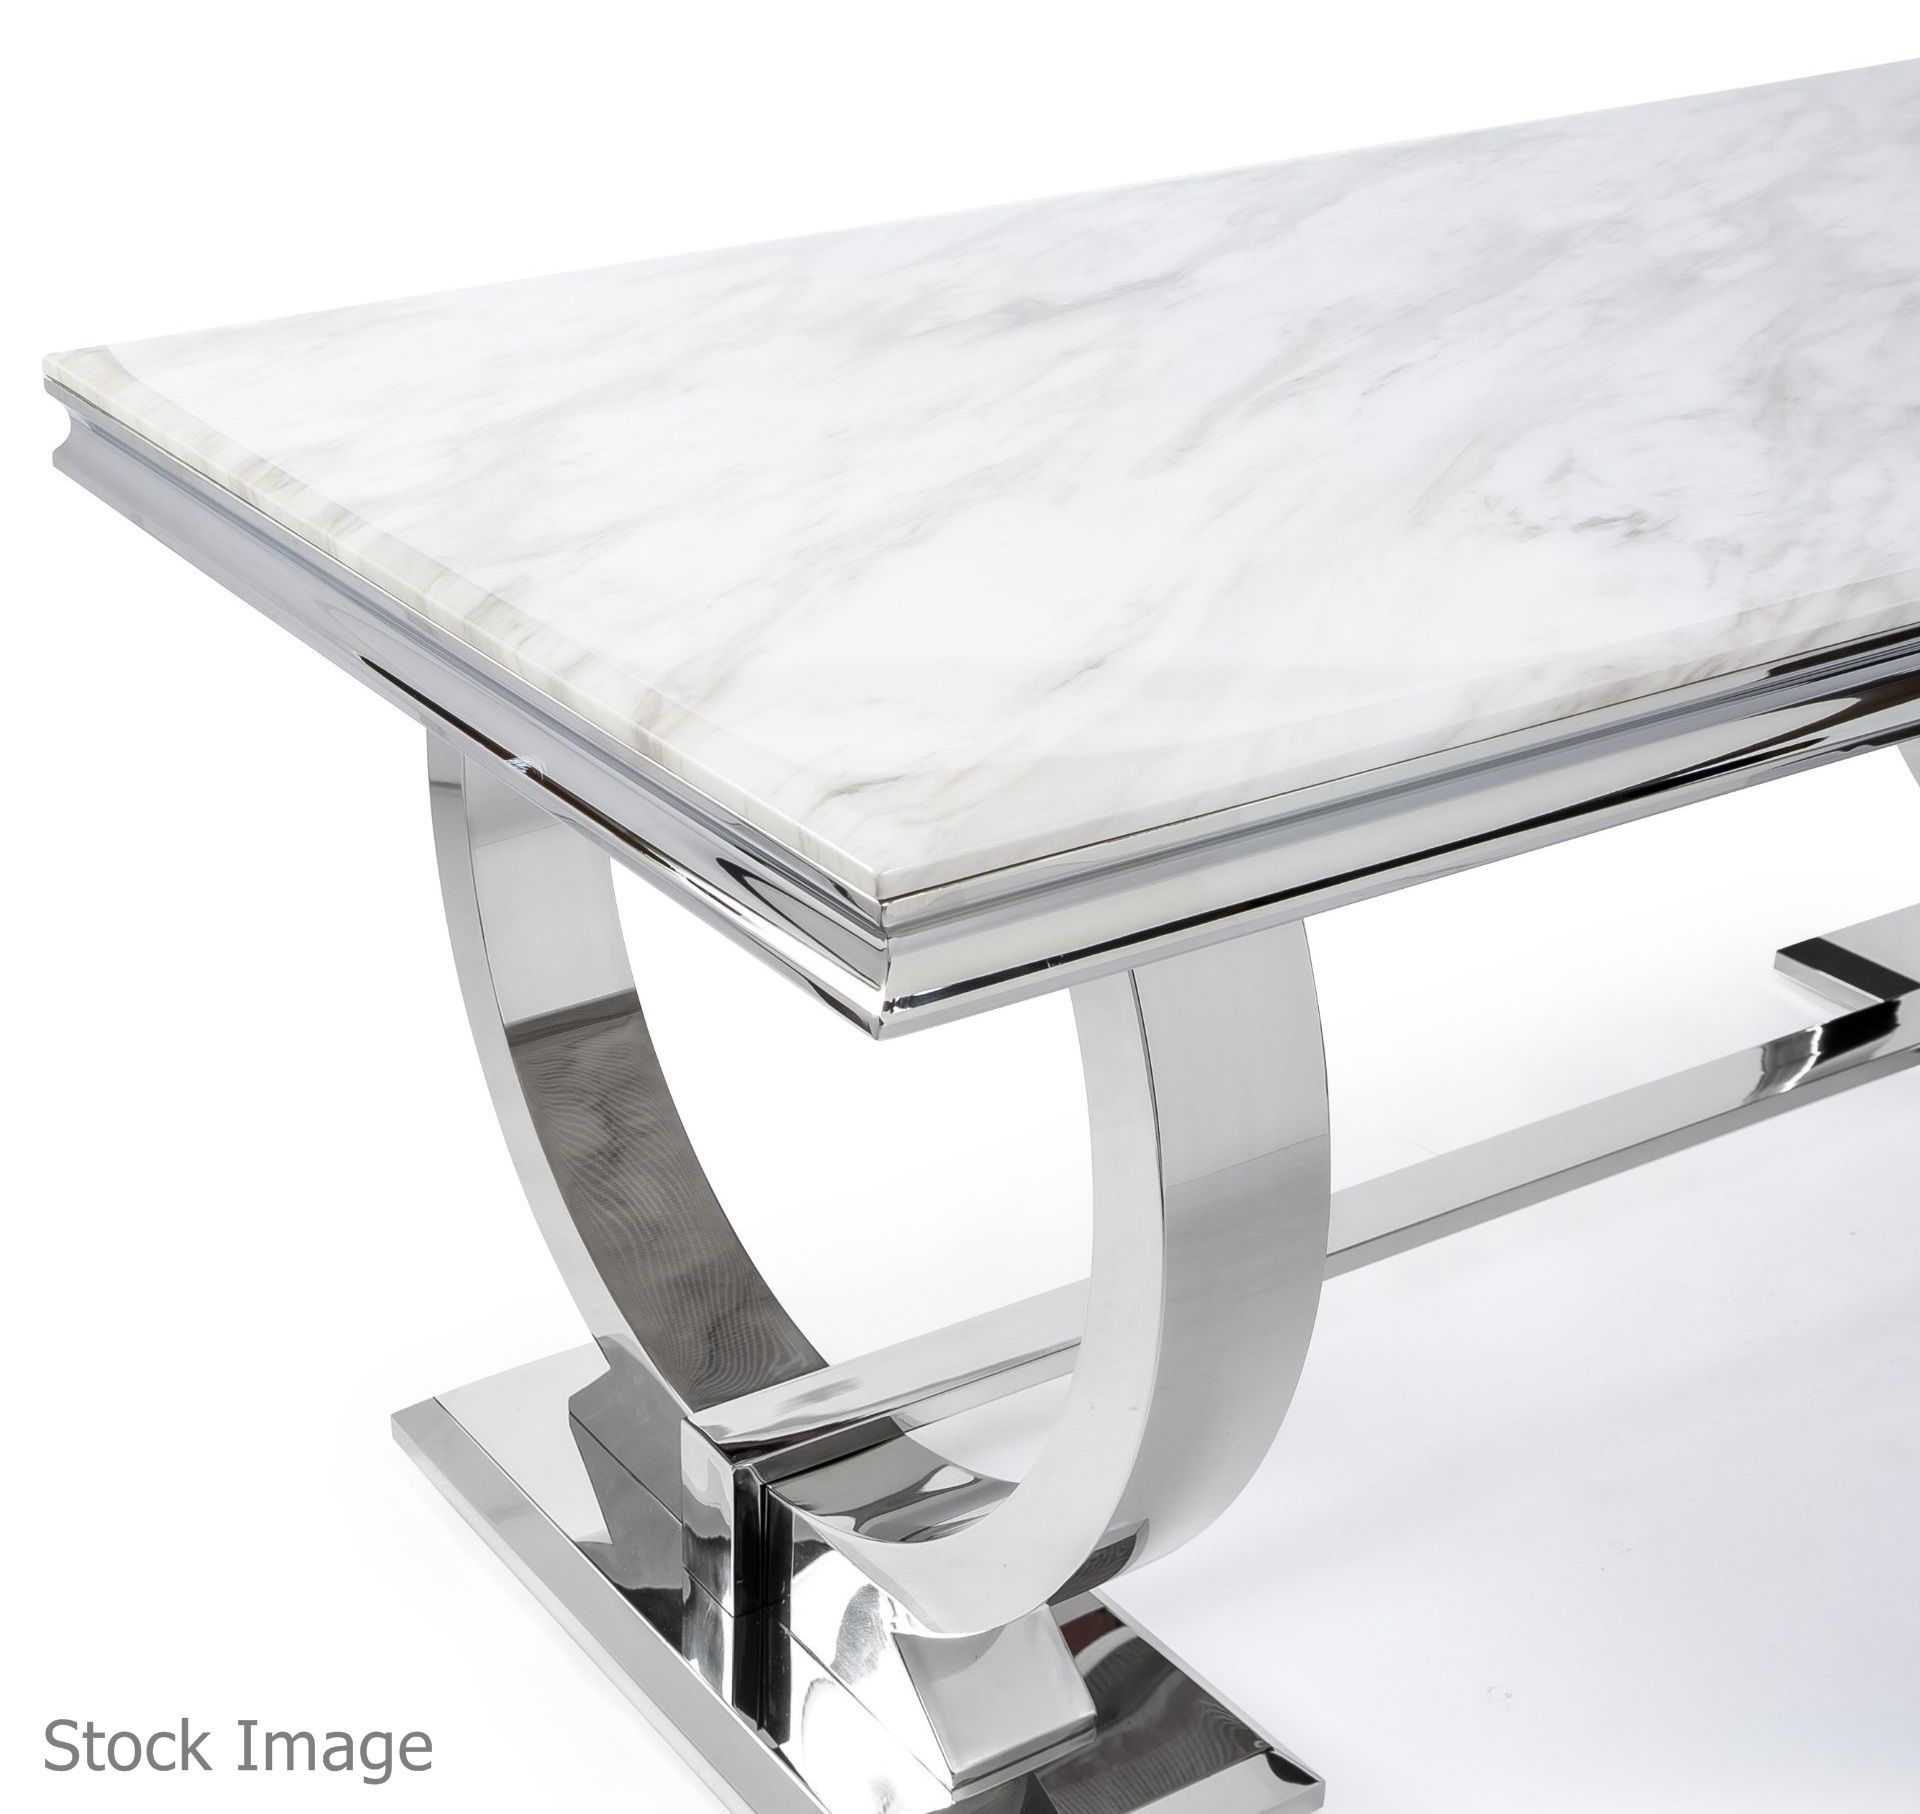 1 x Arianna 2-Metre Long Dining Table With Marble Top With A Chrome Base - Image 5 of 12